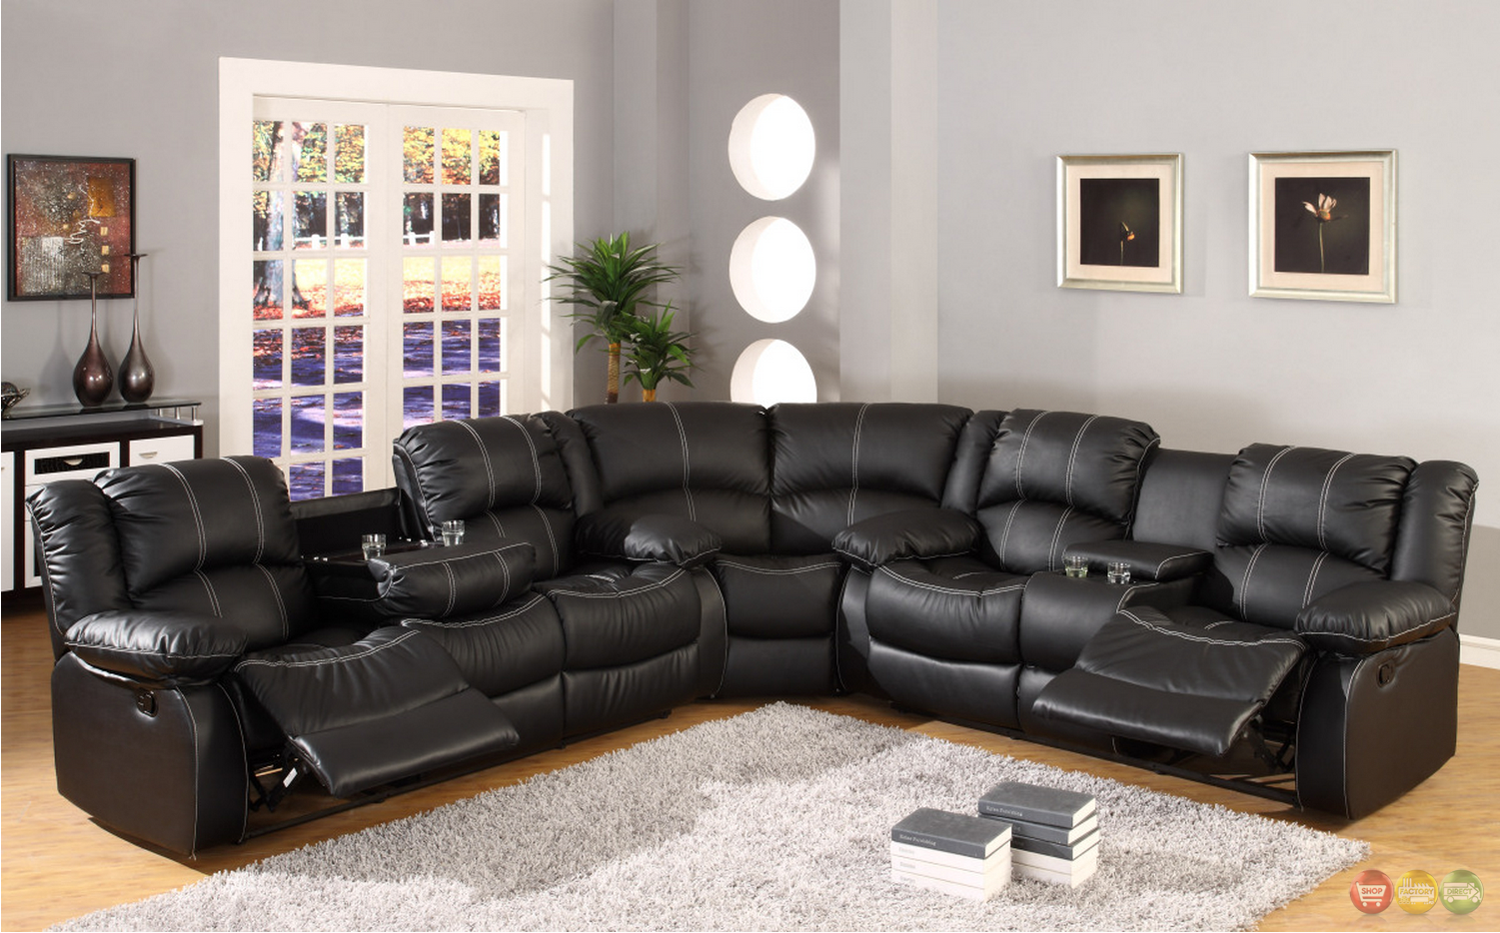 Black Faux Leather Reclining Motion Sectional Sofa w/ Storage Console